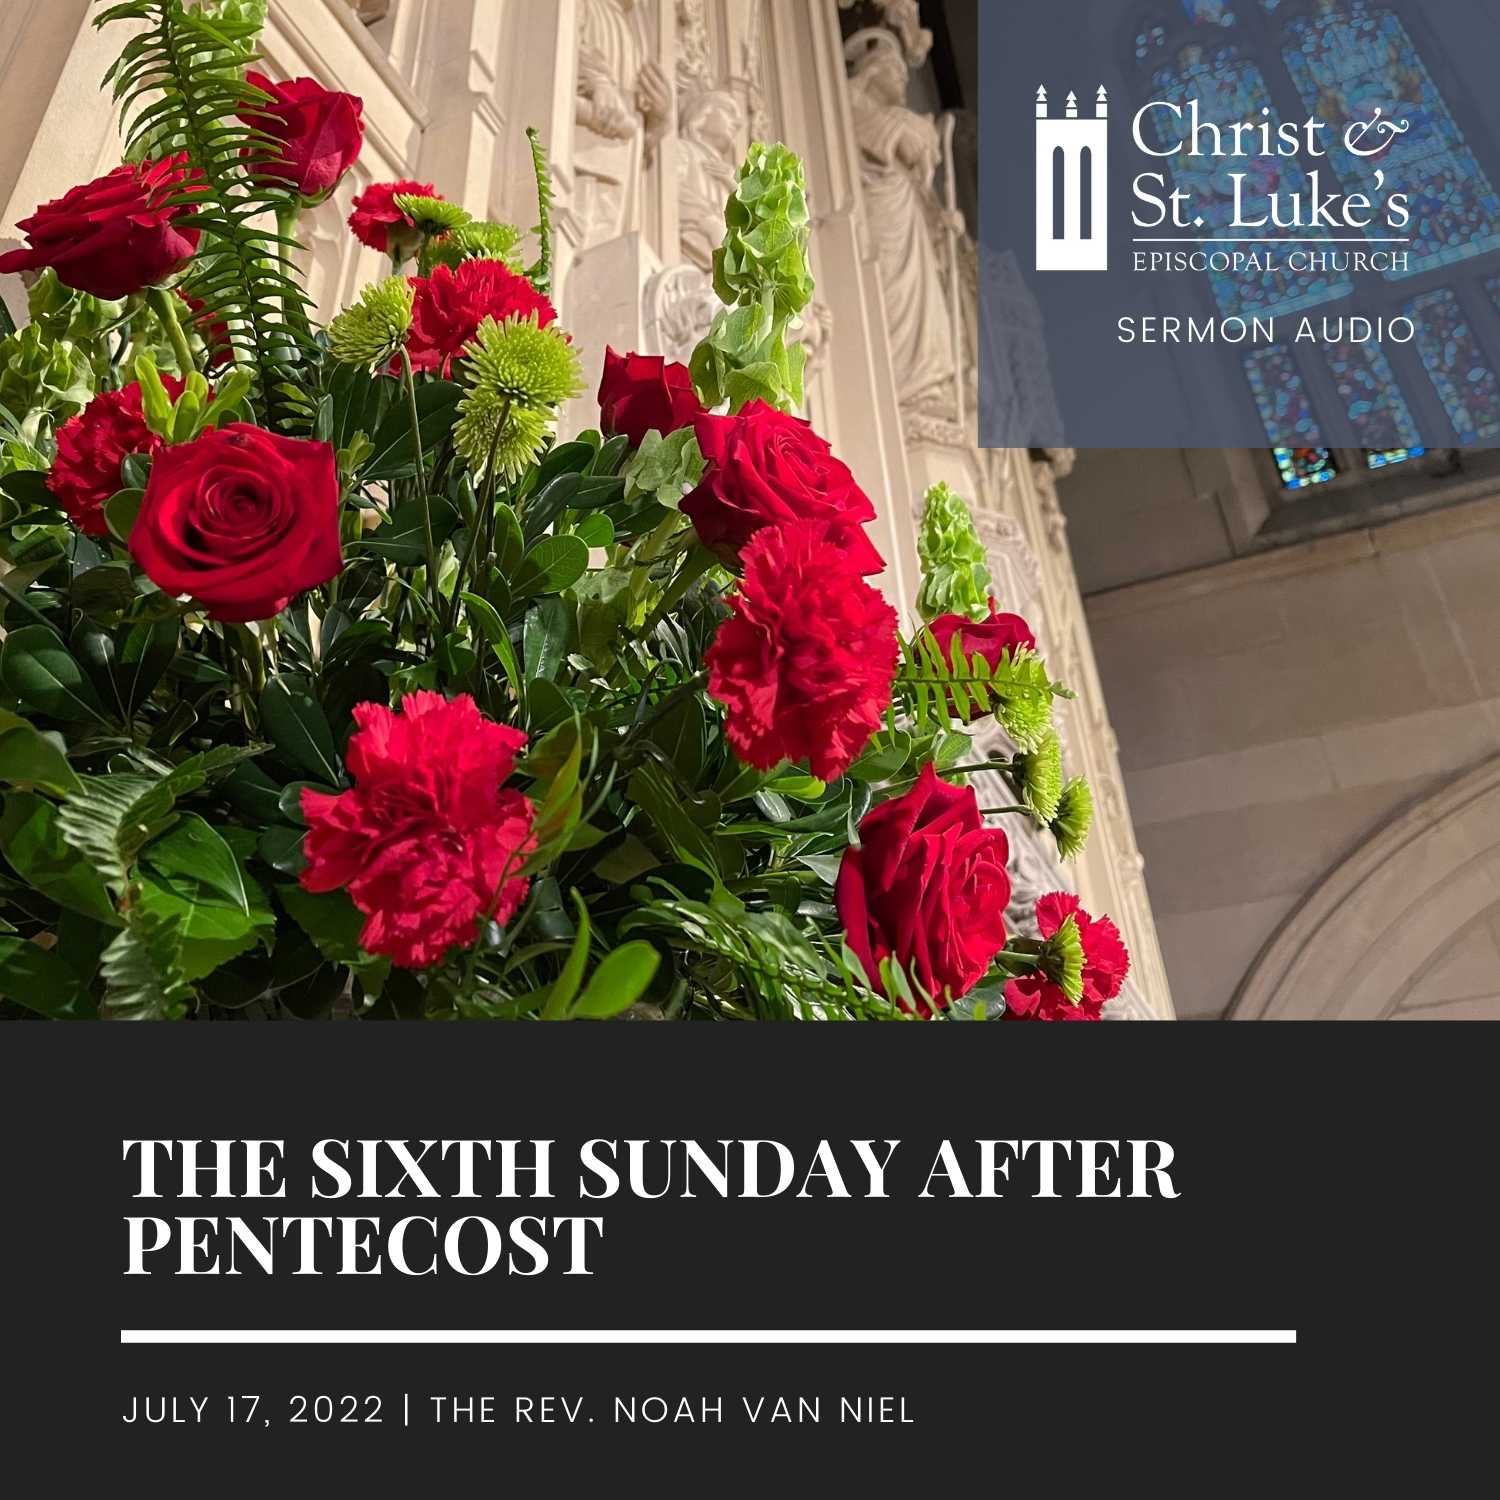 The Sixth Sunday After Pentecost